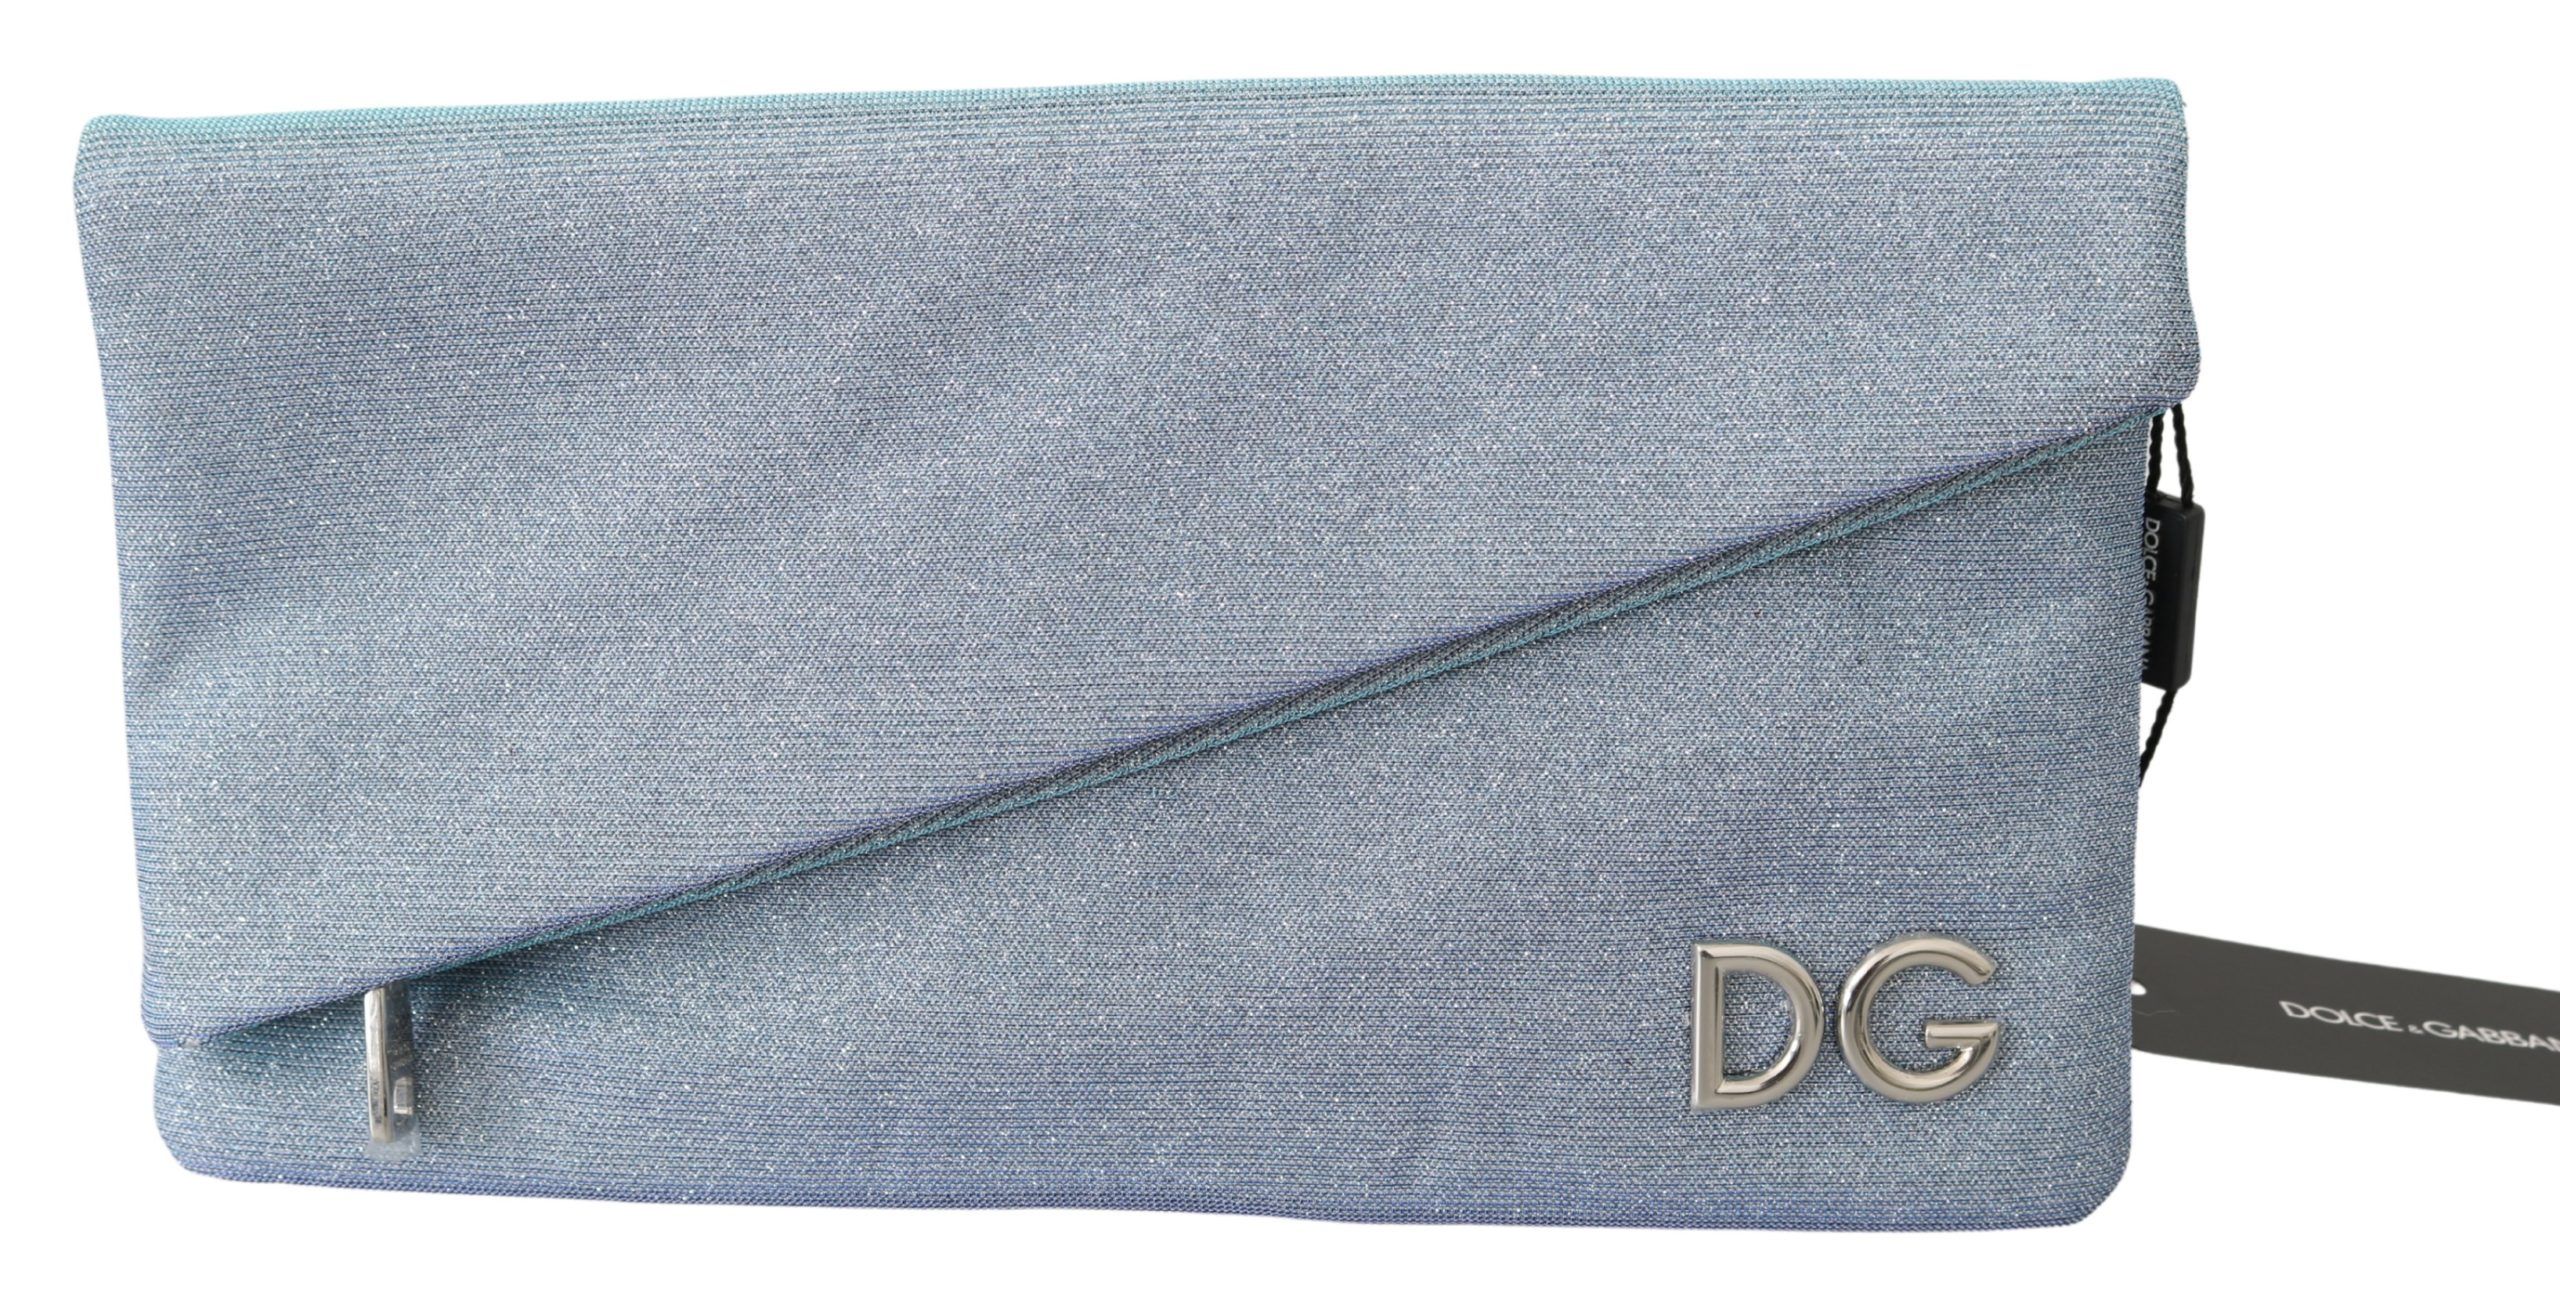 DOLCE & GABBANA. 
Gorgeous brand new with tags, 100% Authentic Dolce & Gabbana Women’s Bag.
Model: CLEO
Material: Canvas
Color: Light Blue
Zipper closure
Logo details
Made in Italy
Very exclusive and high craftsmanship
Measurements: 27cm x 16cm x 1cm